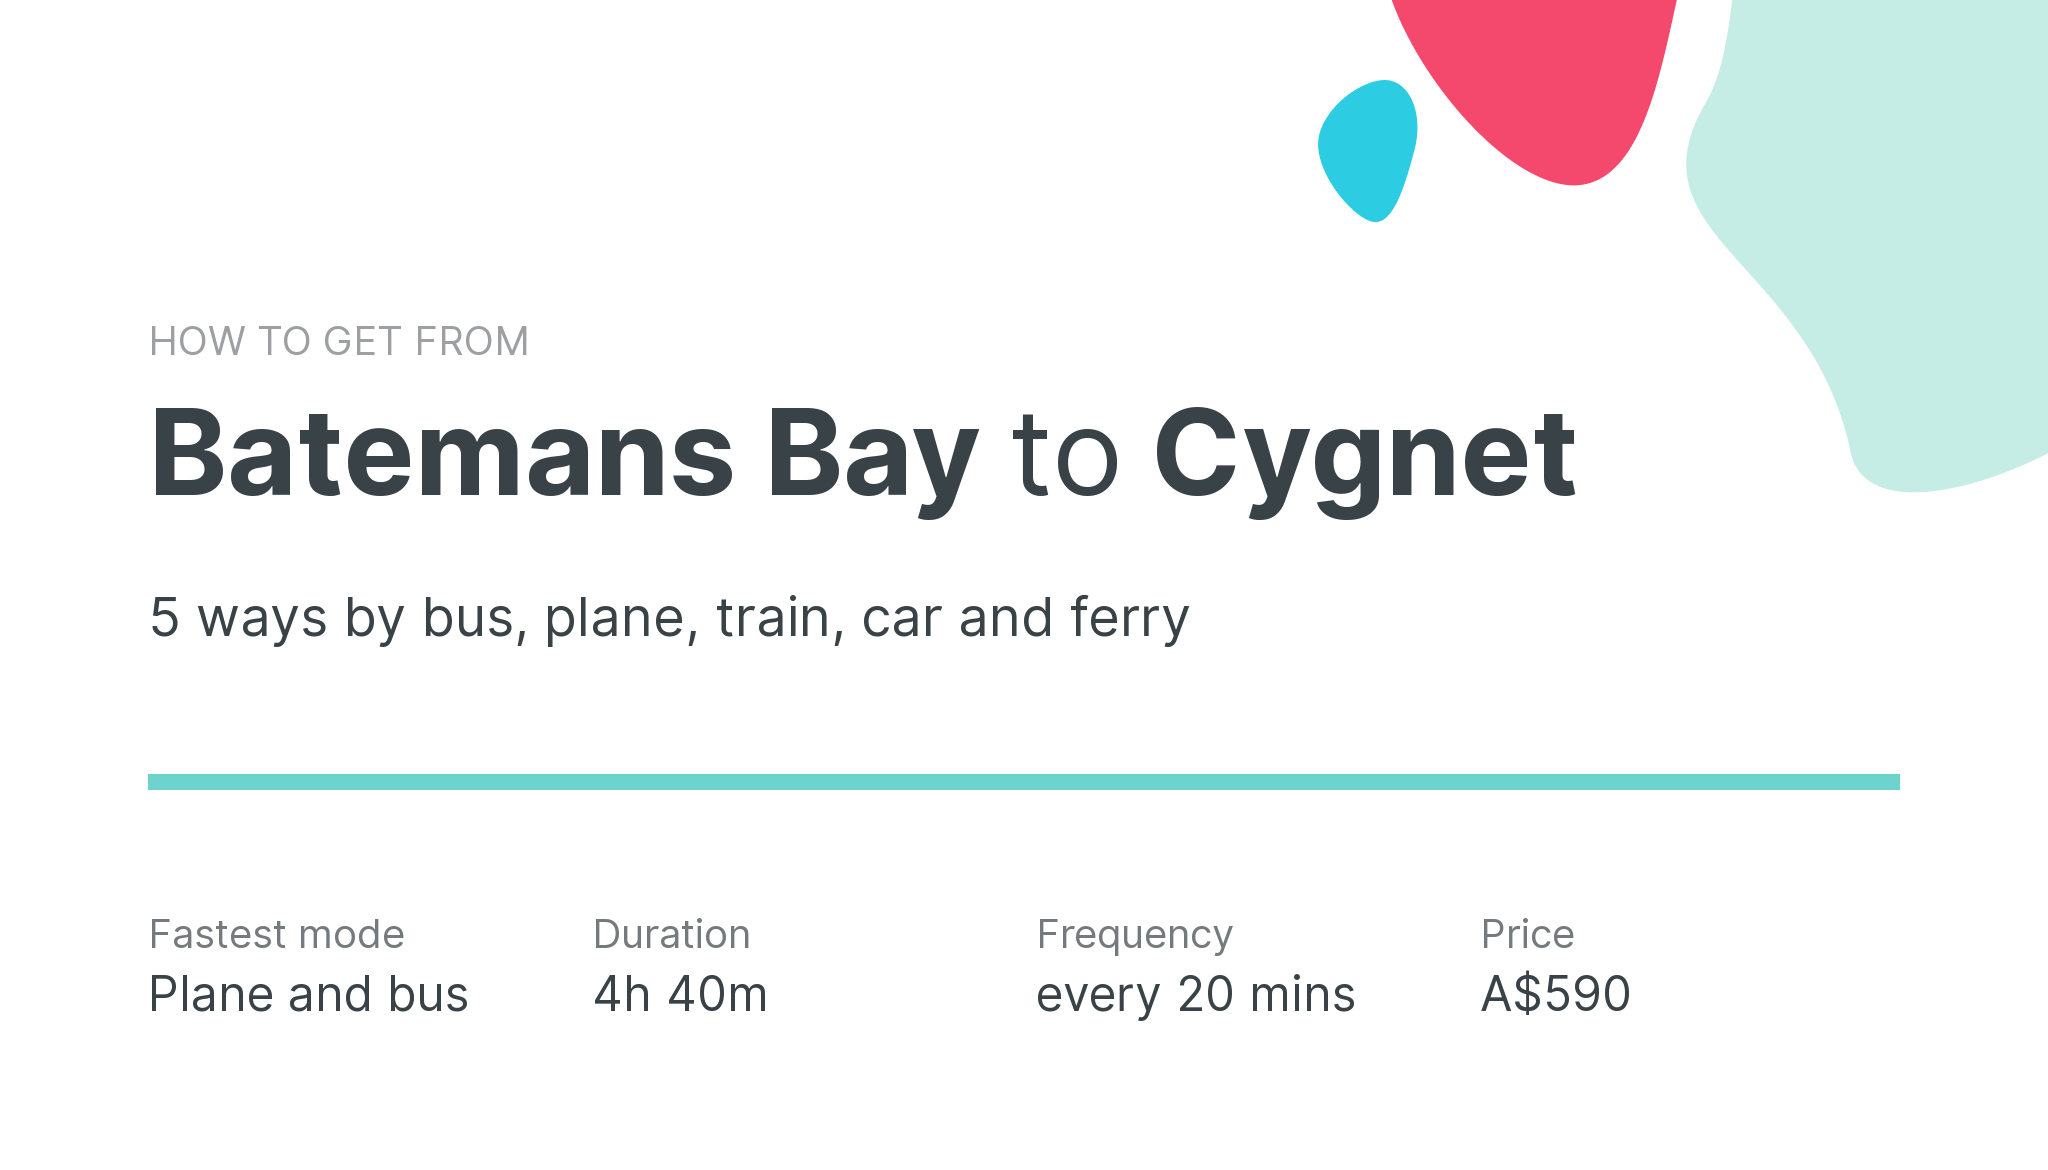 How do I get from Batemans Bay to Cygnet